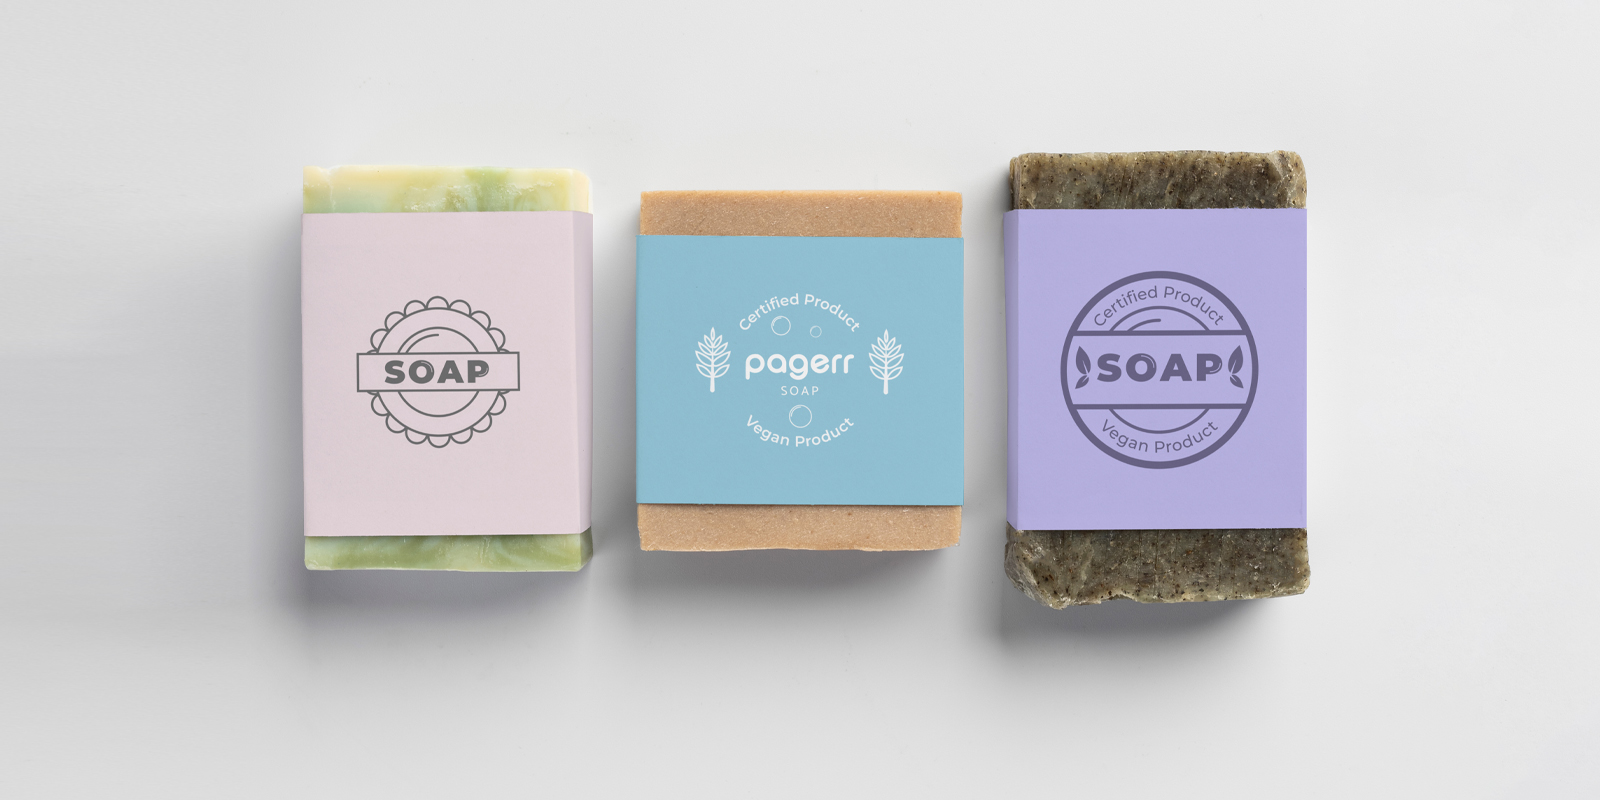 Soap labels in Gold Coast - Print with Pagerr